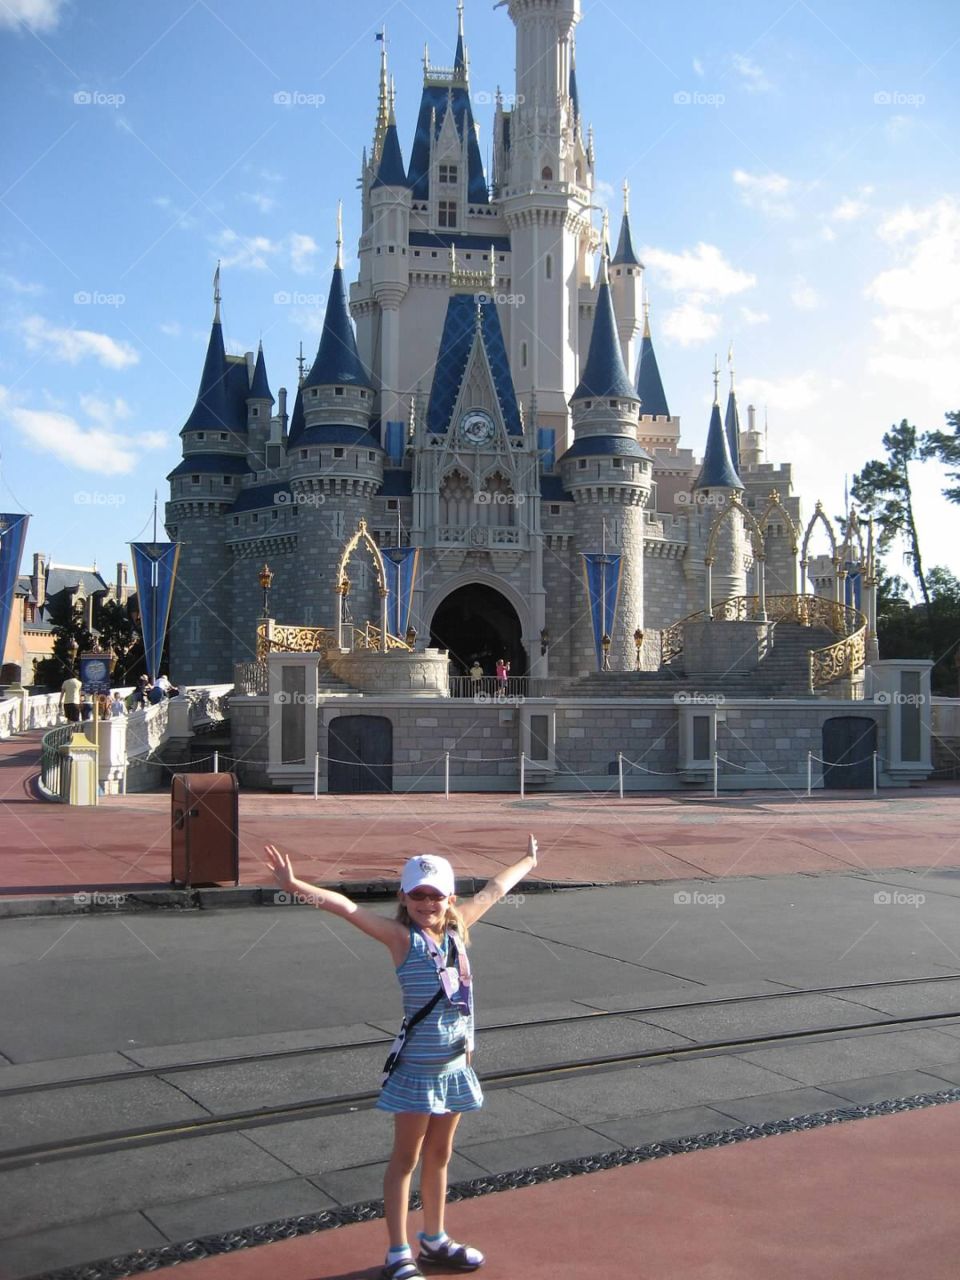 The Kingdom is Hers. She made it to Disneyworld Magic Kingsom for her birthday at last! 